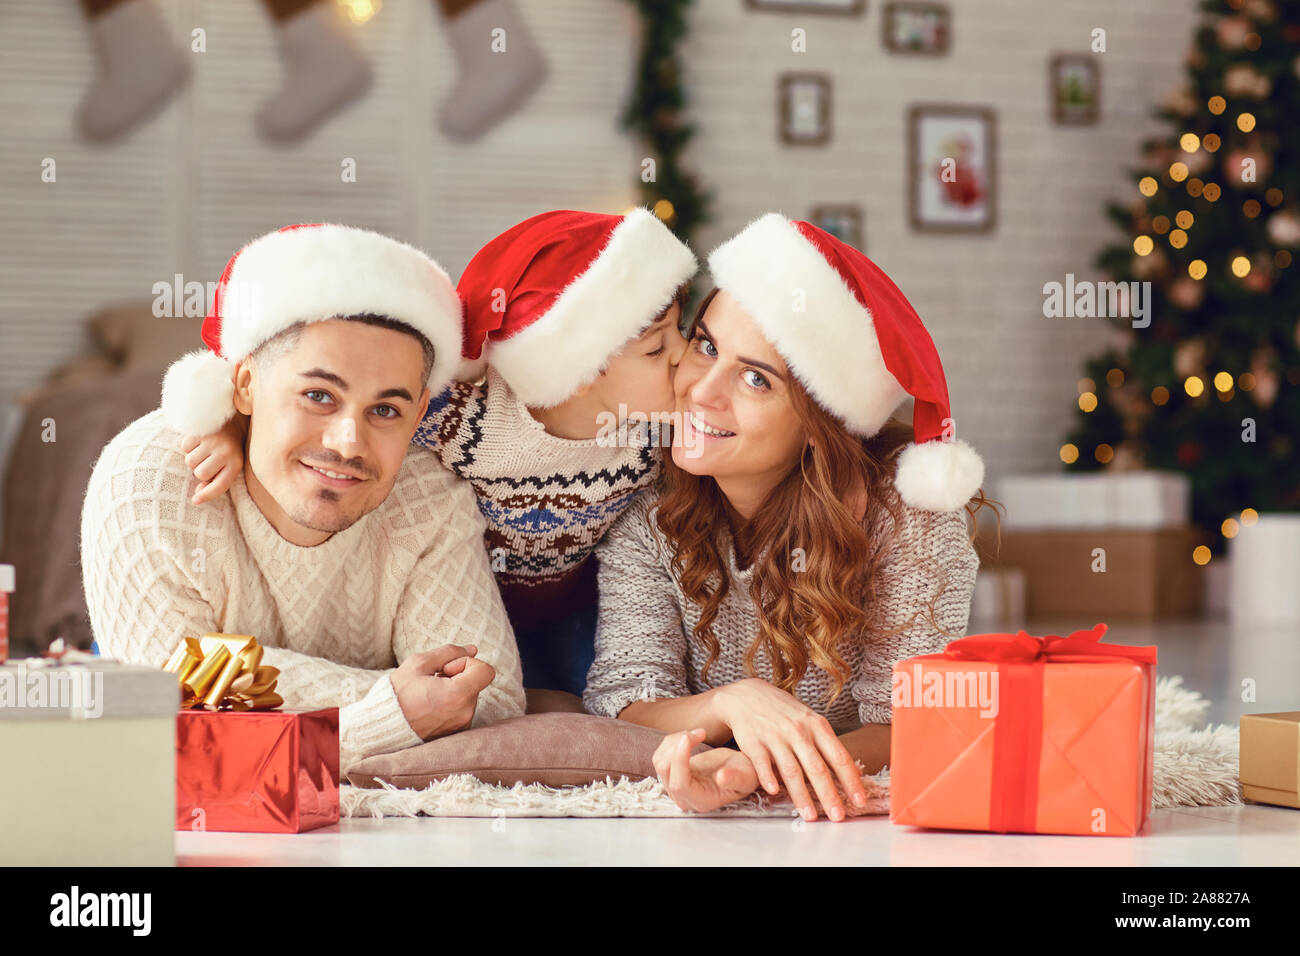 Happy family smiling lying on the floor in Christmas. Stock Photo